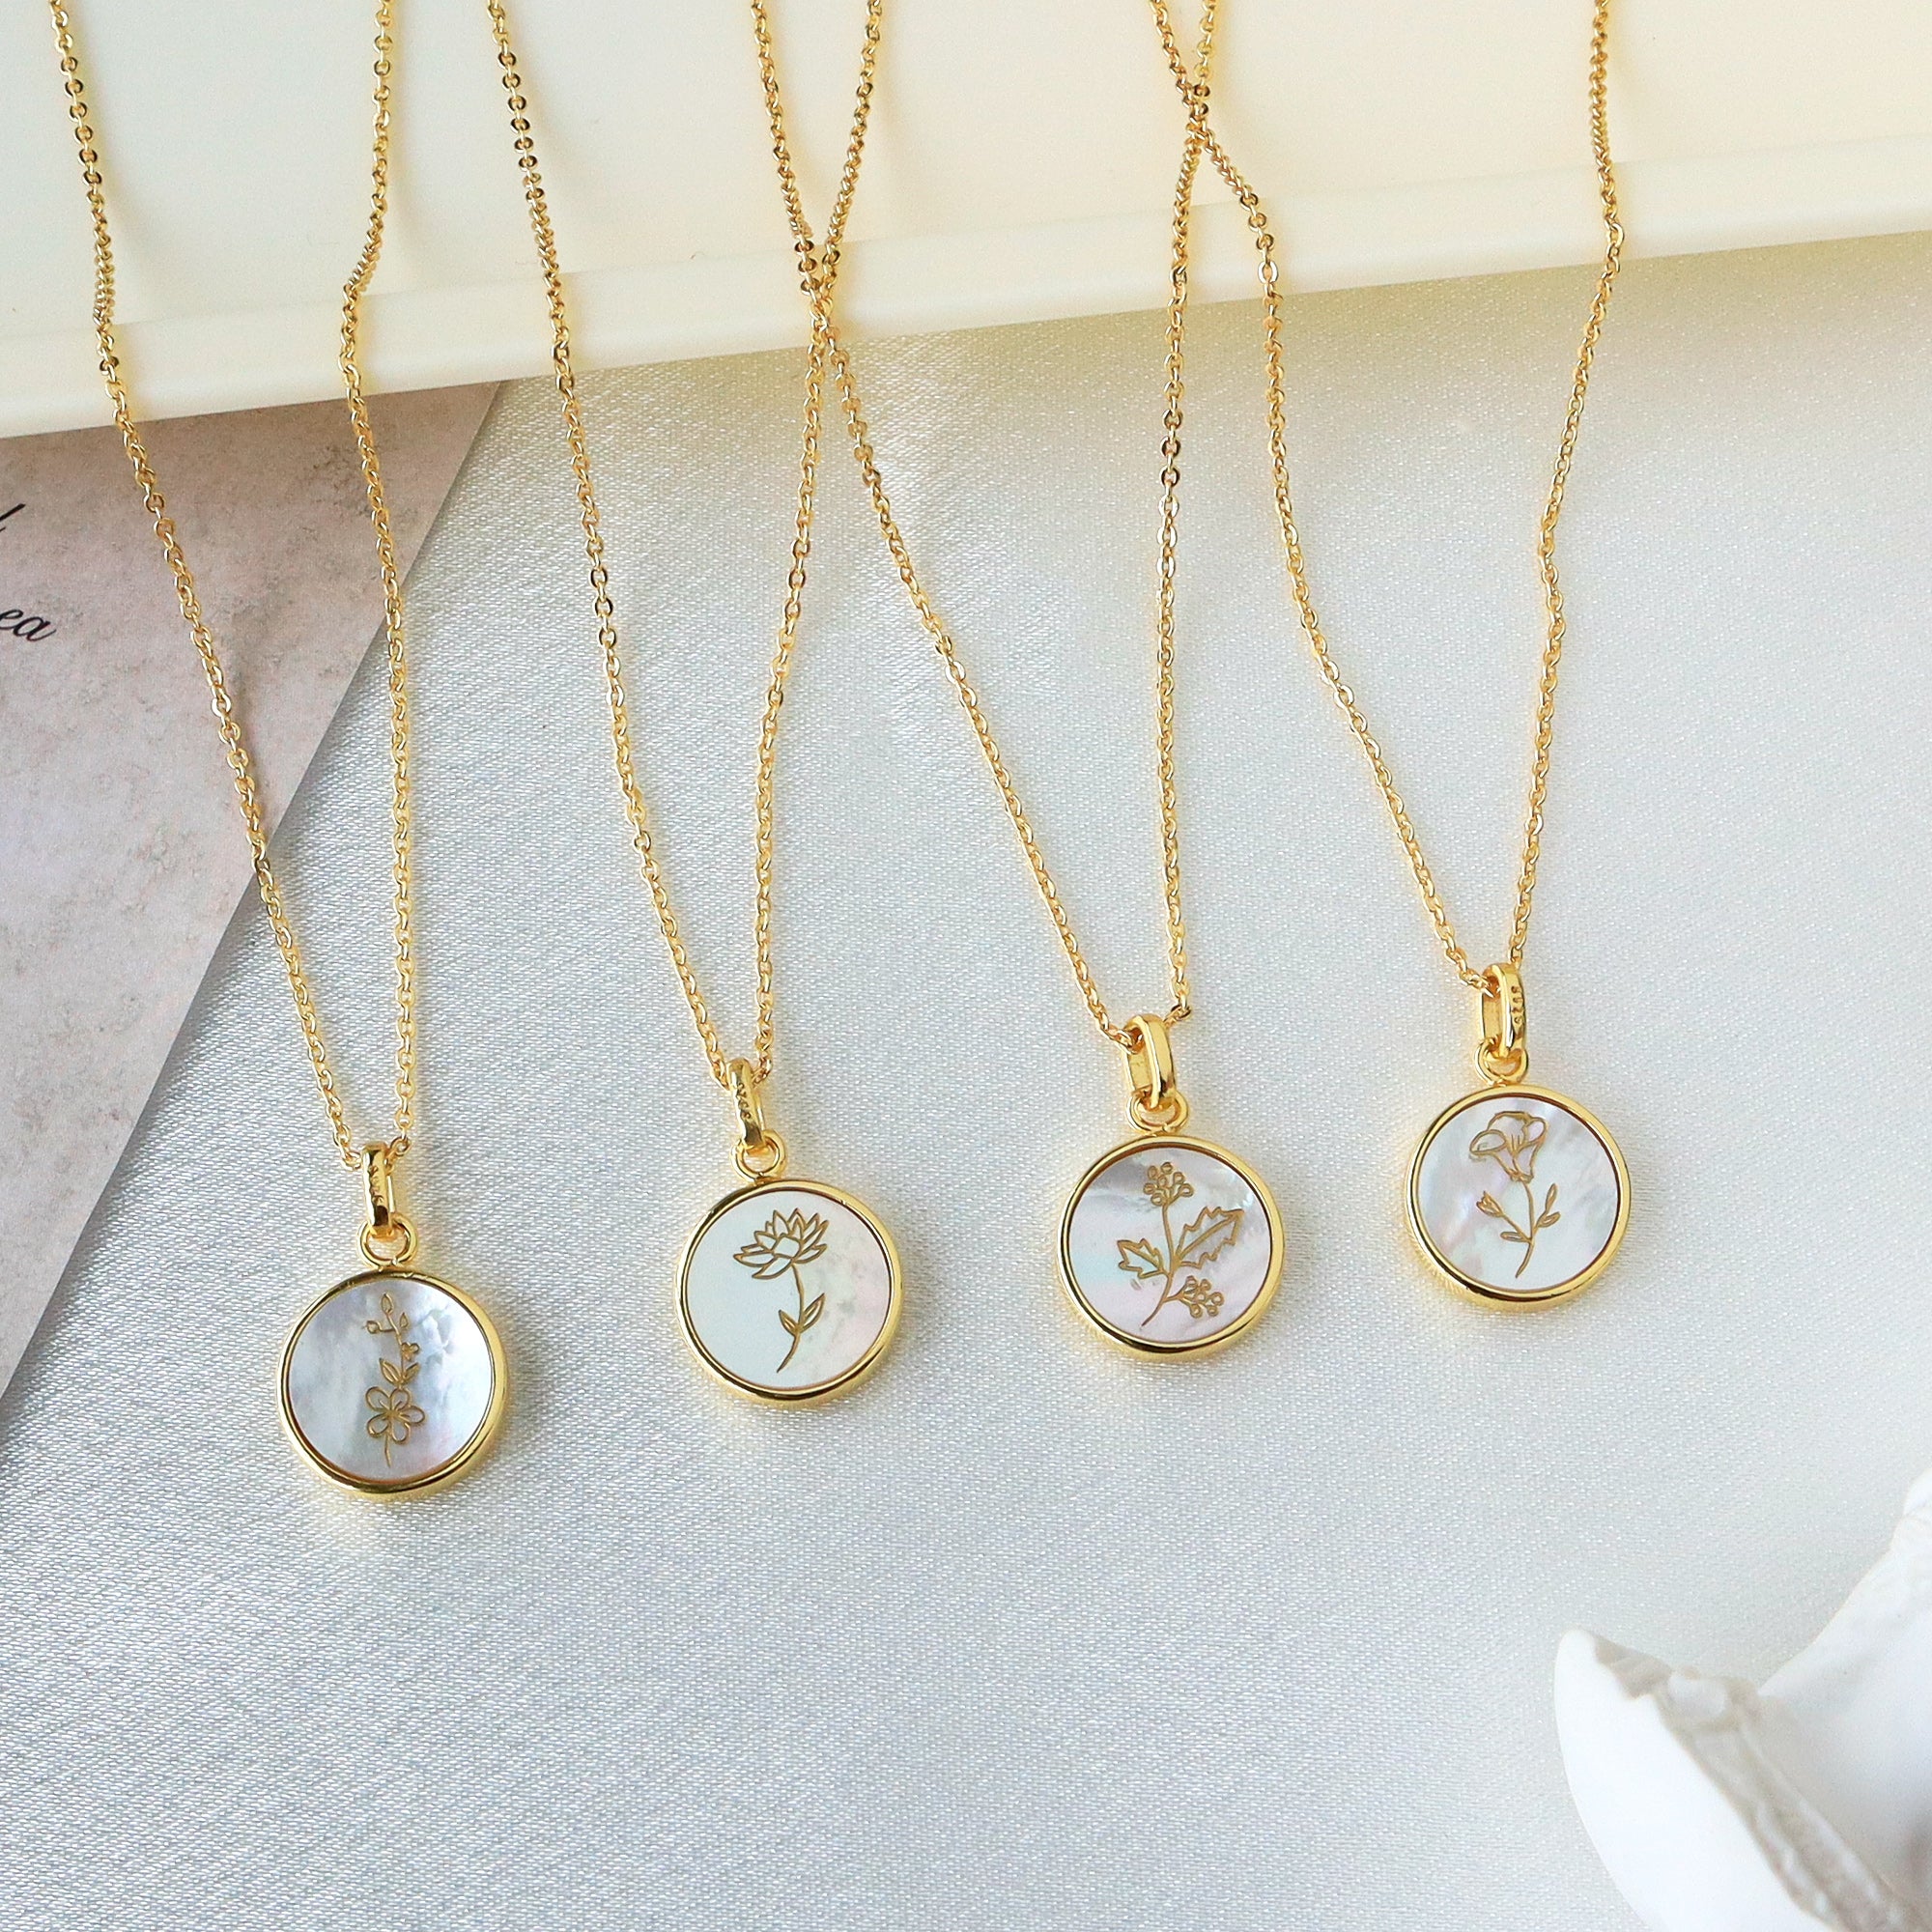 Wholesale Gold Plated Round White Shell Carved Birth Month Flower Pendant Necklace, Natural Shell Jewelry KZ009